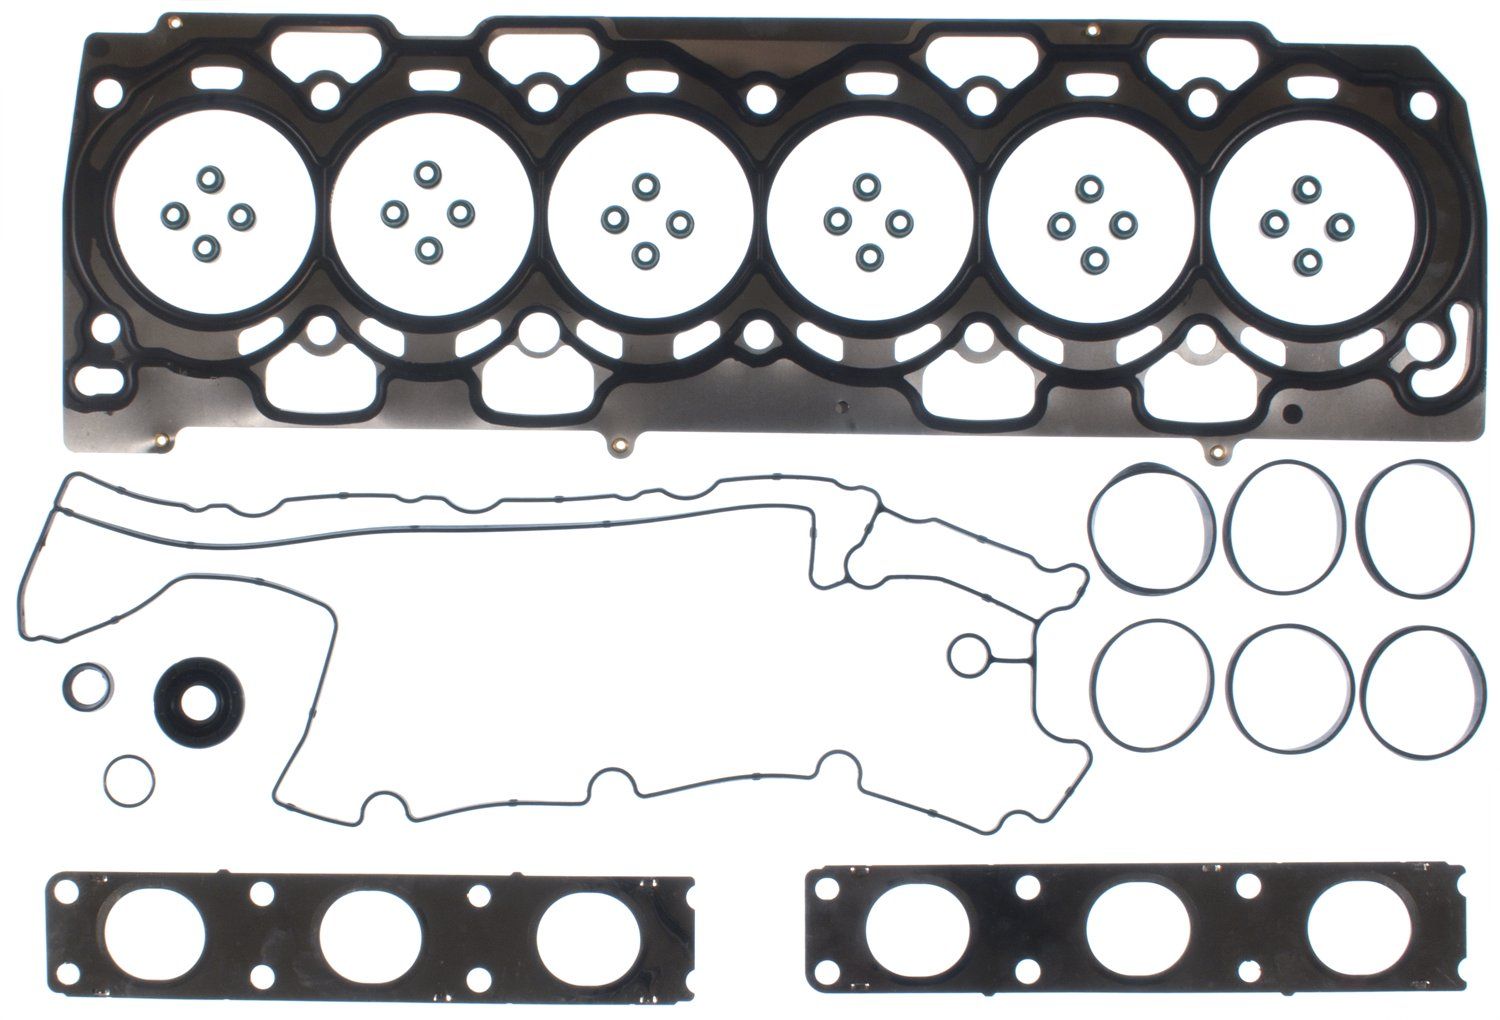 2006 volvo s80 head gasket replacement